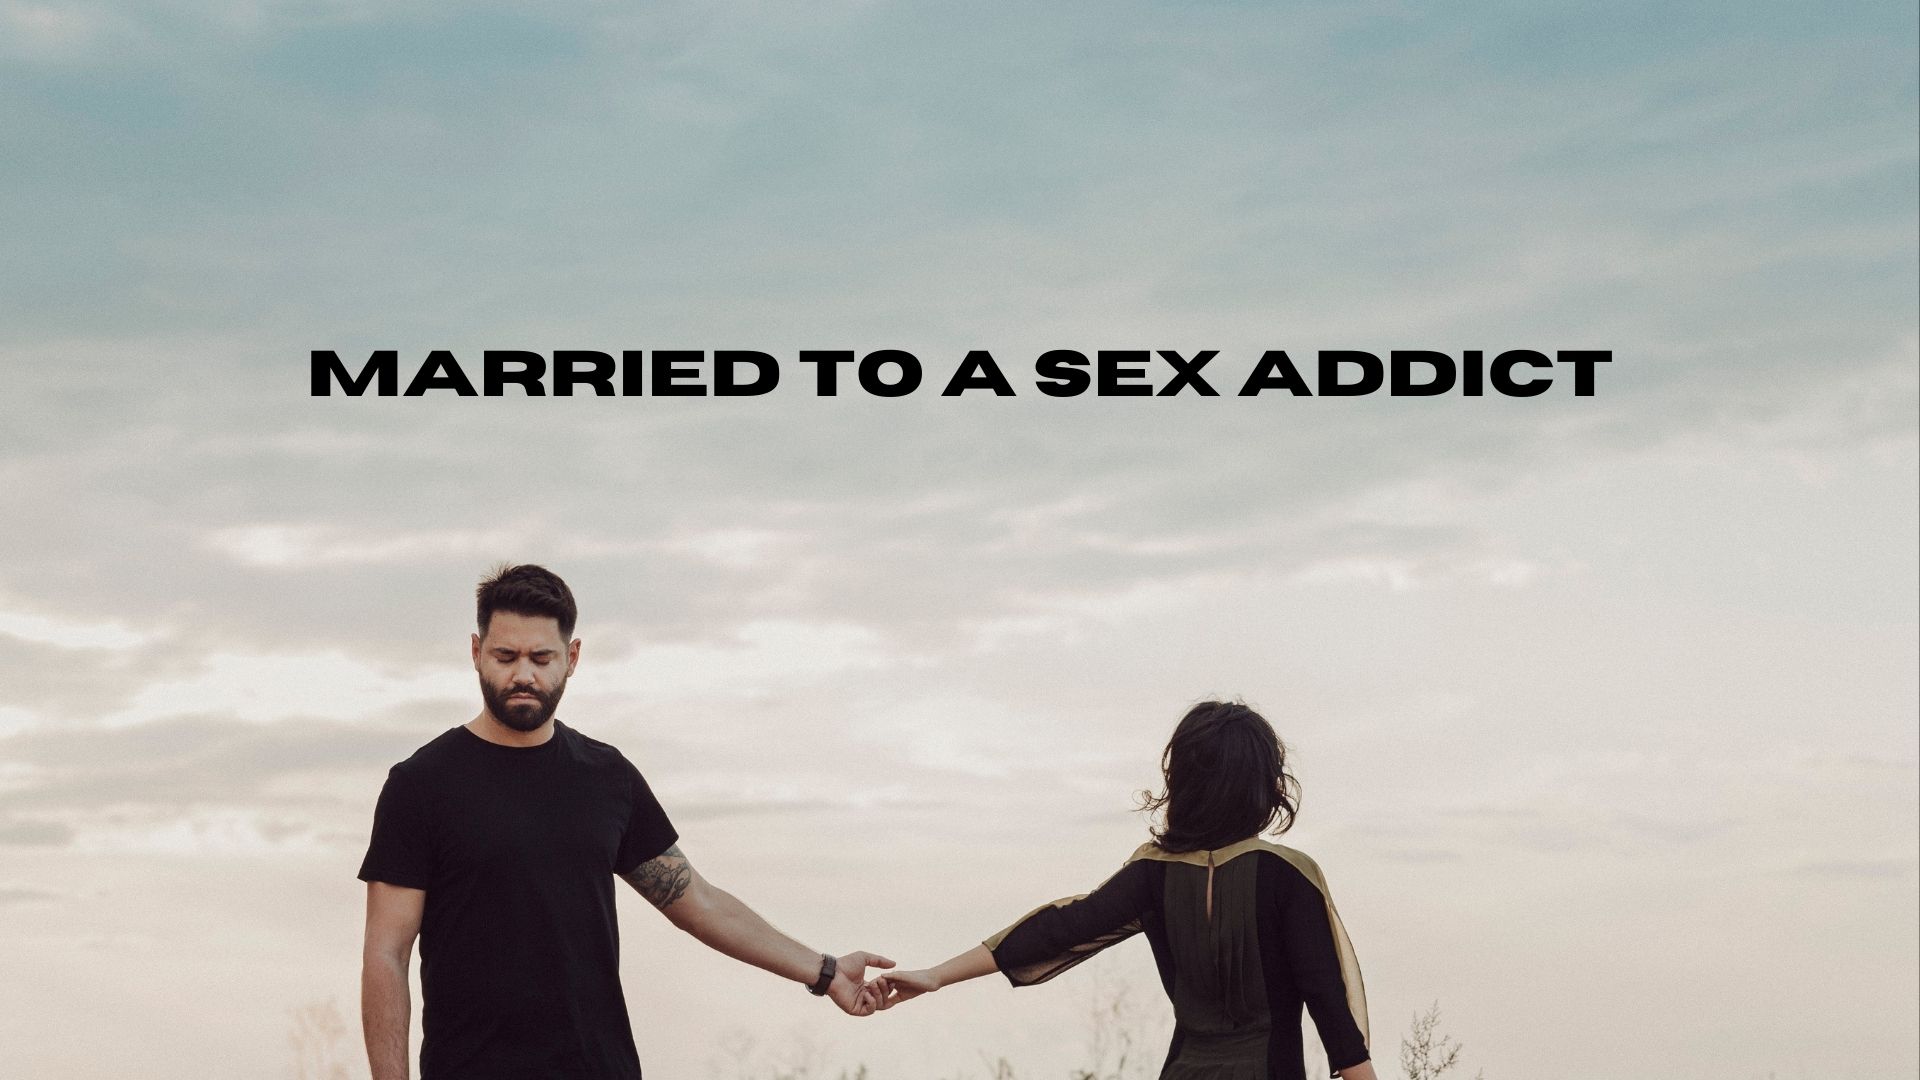 being married to a sex addict